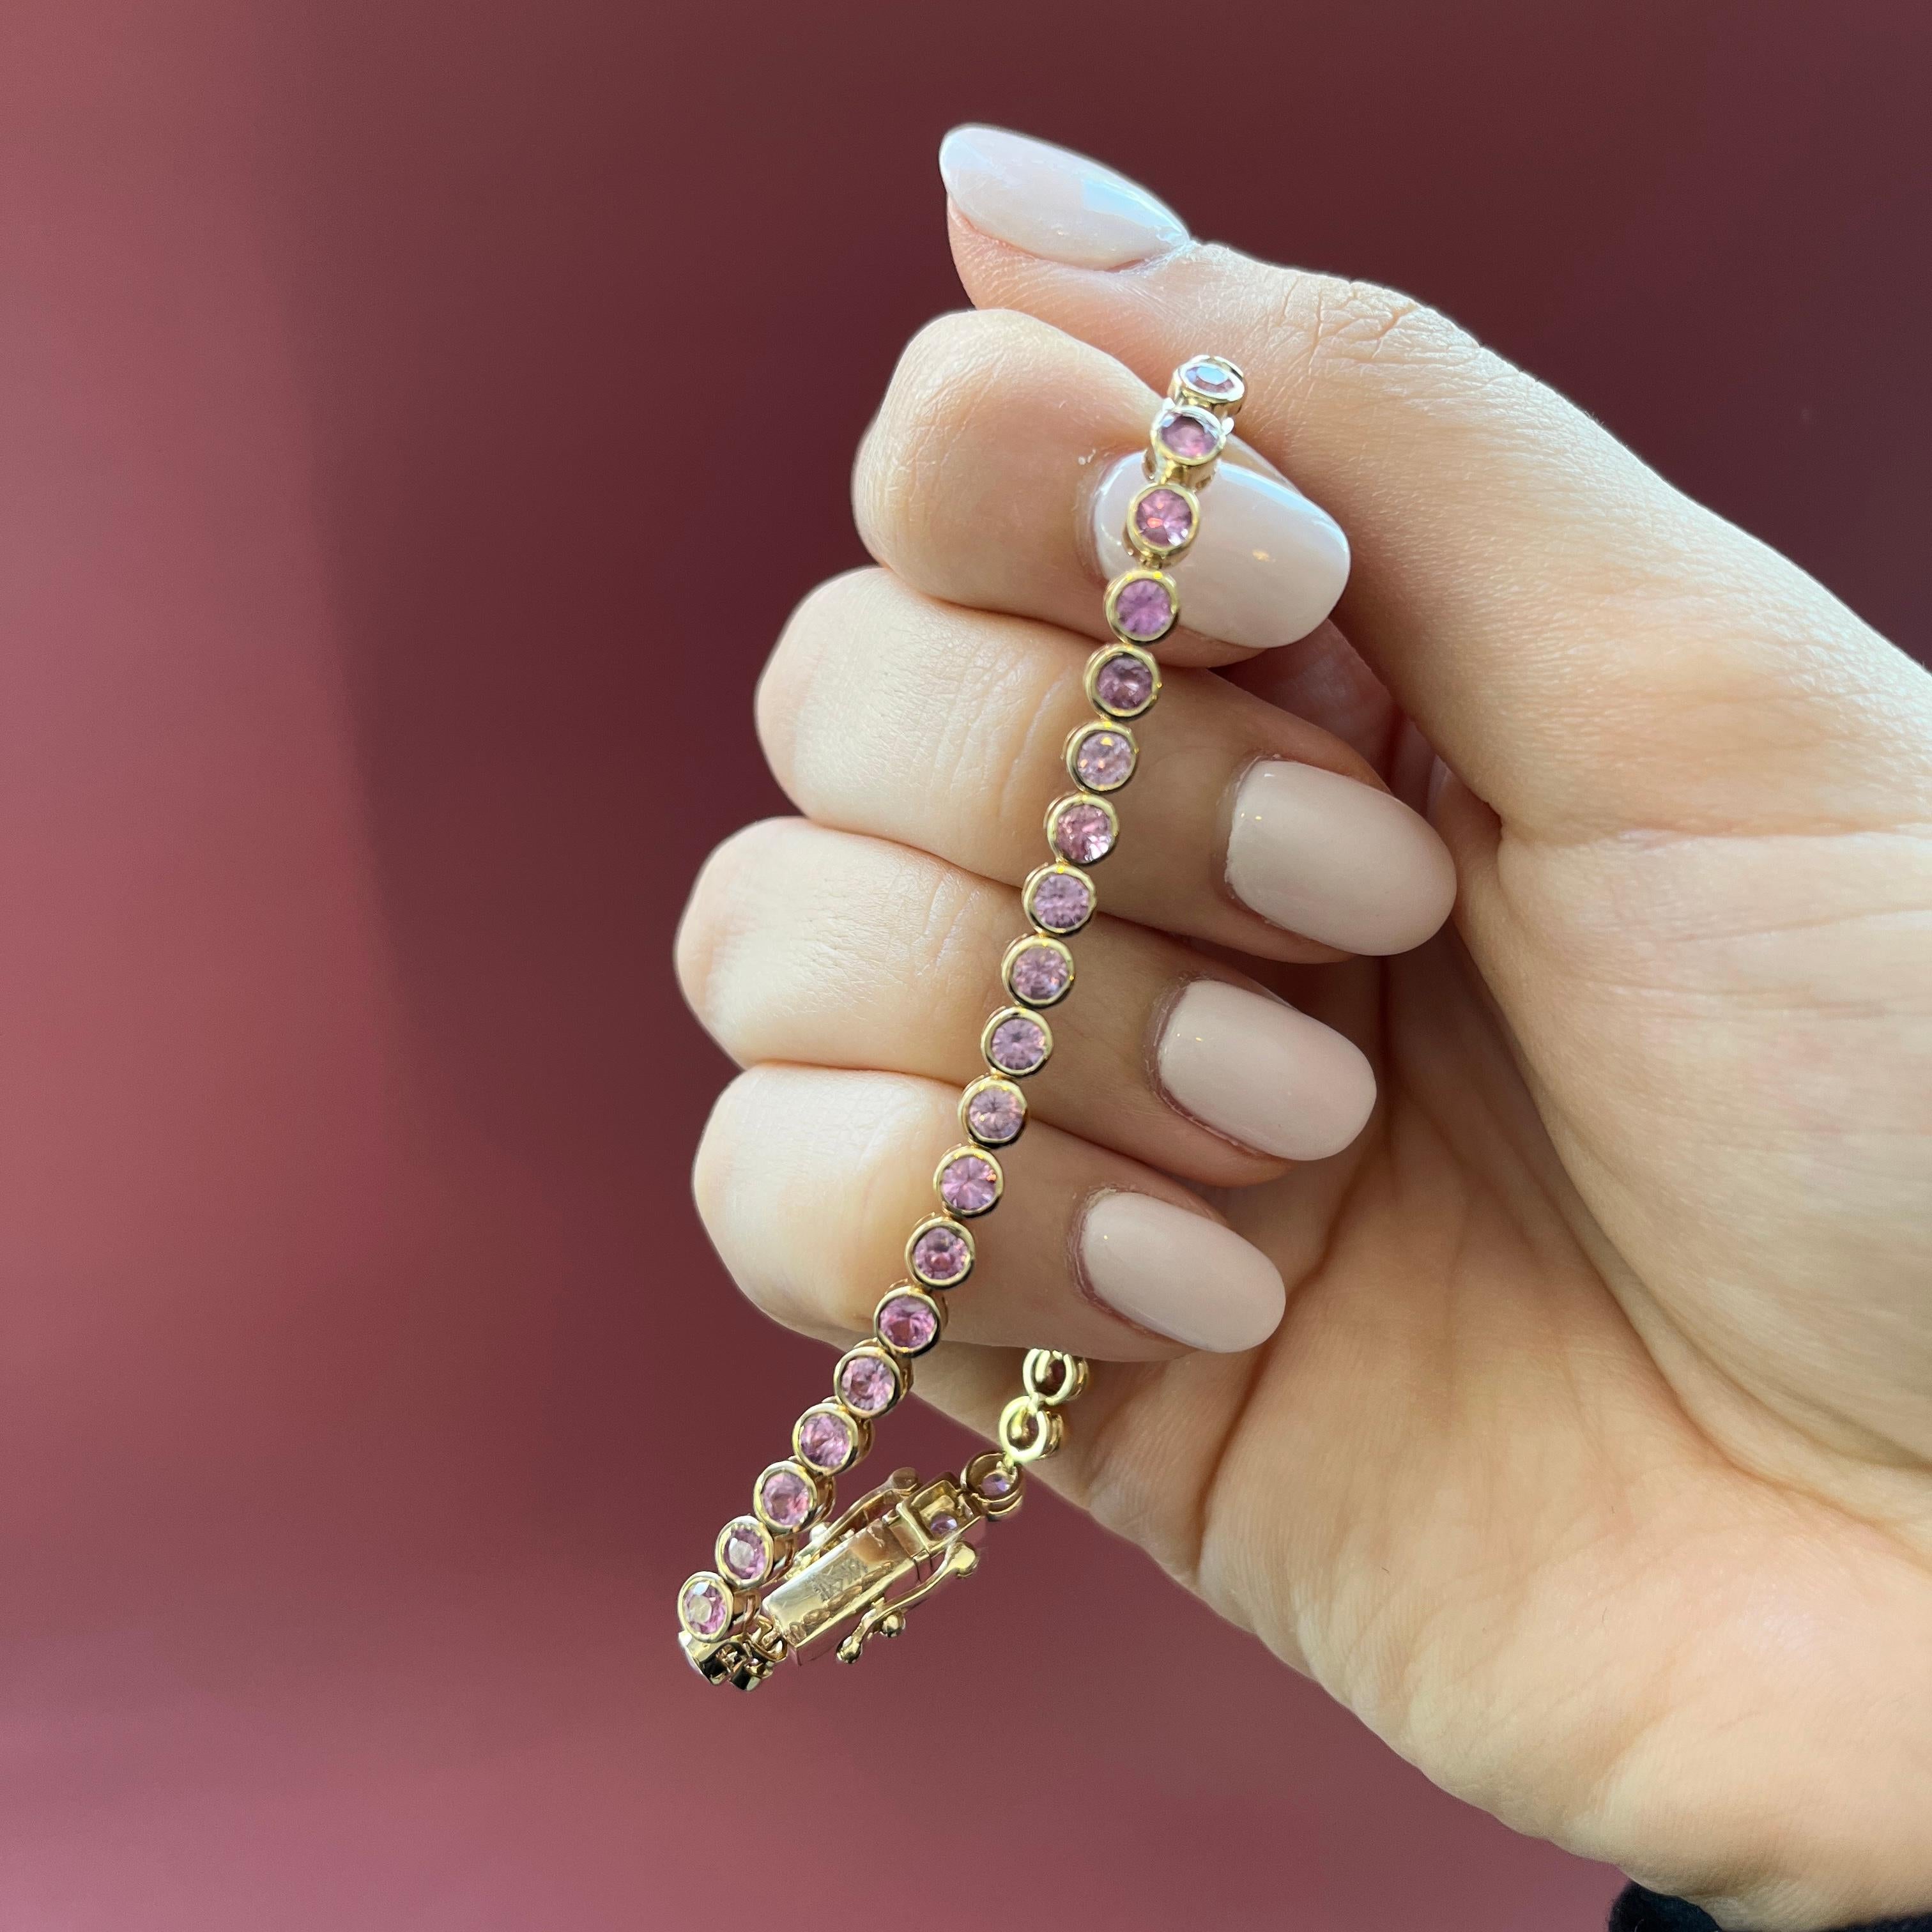 Experience timeless elegance with this stunning tennis bracelet, boasting beautiful Pink Sapphires in a sleek bezel setting. Perfect for any occasion, this piece exudes sophistication and class.

14K Yellow Gold
44 Round Pink Sapphires at 6.37